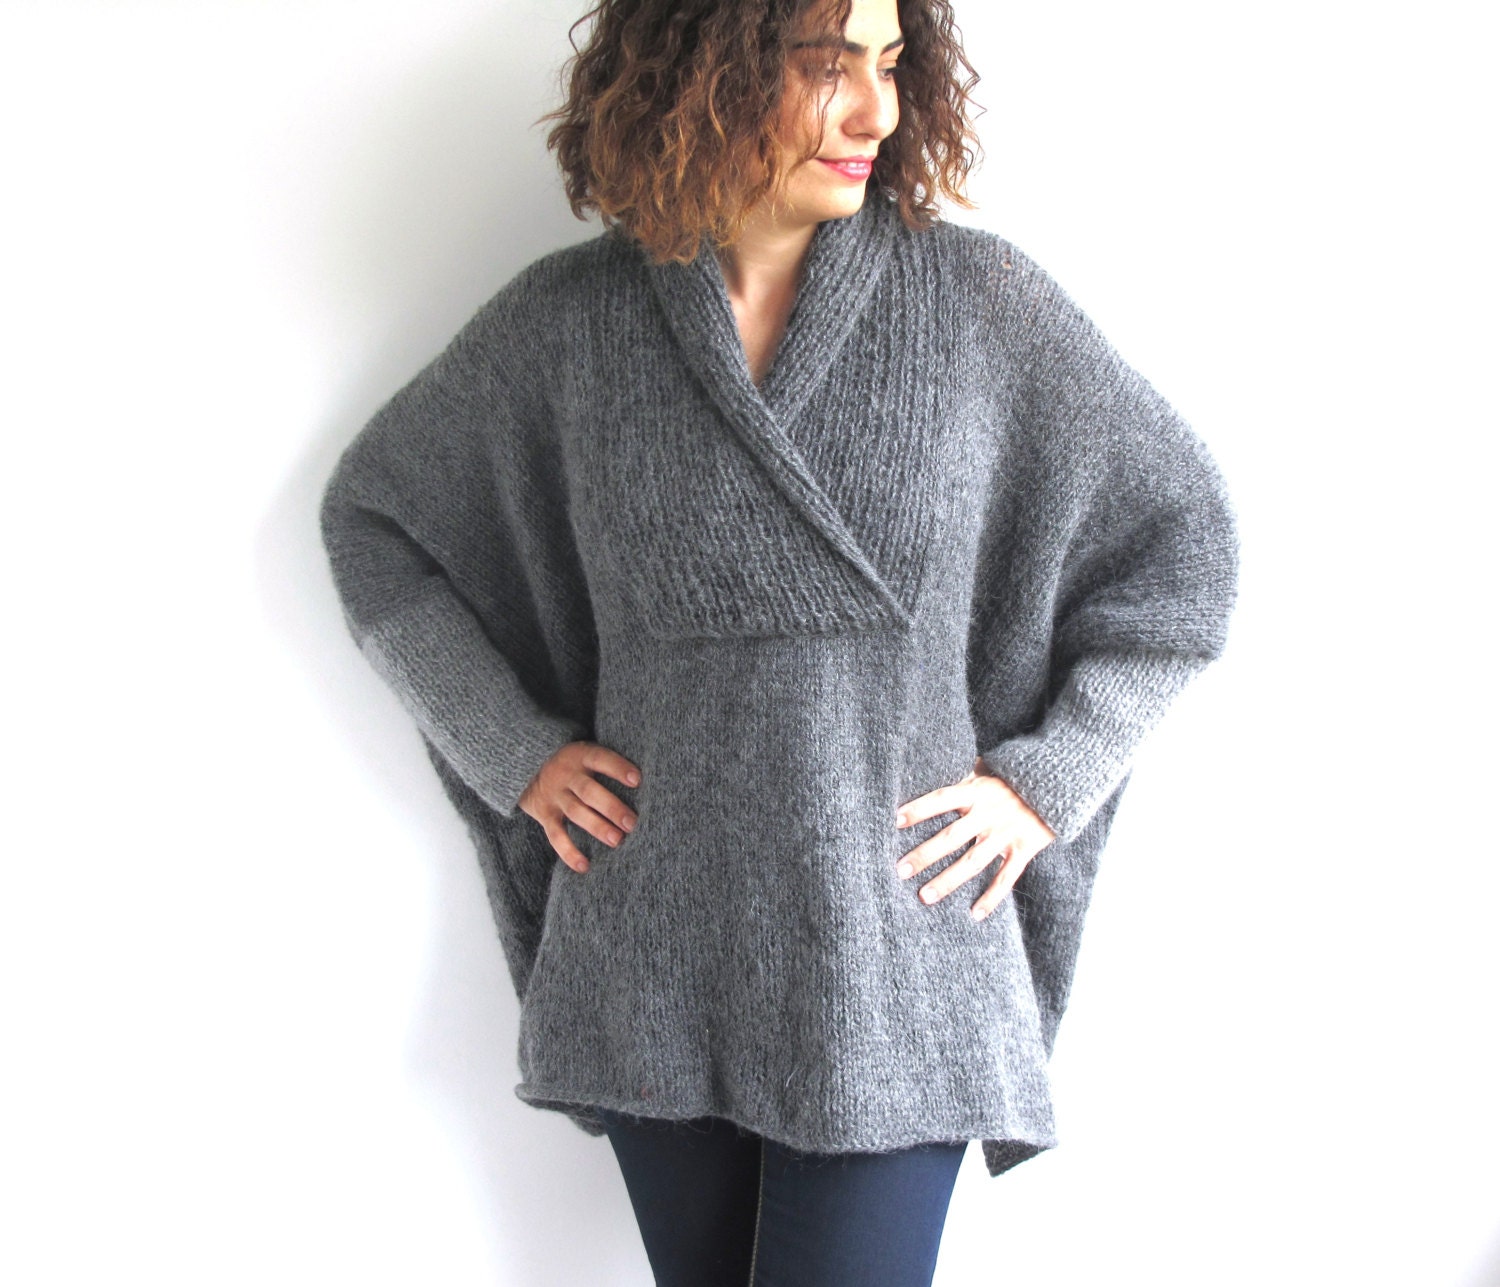 Plus Size Gray Hand Knitted Sweater Tunic | Etsy